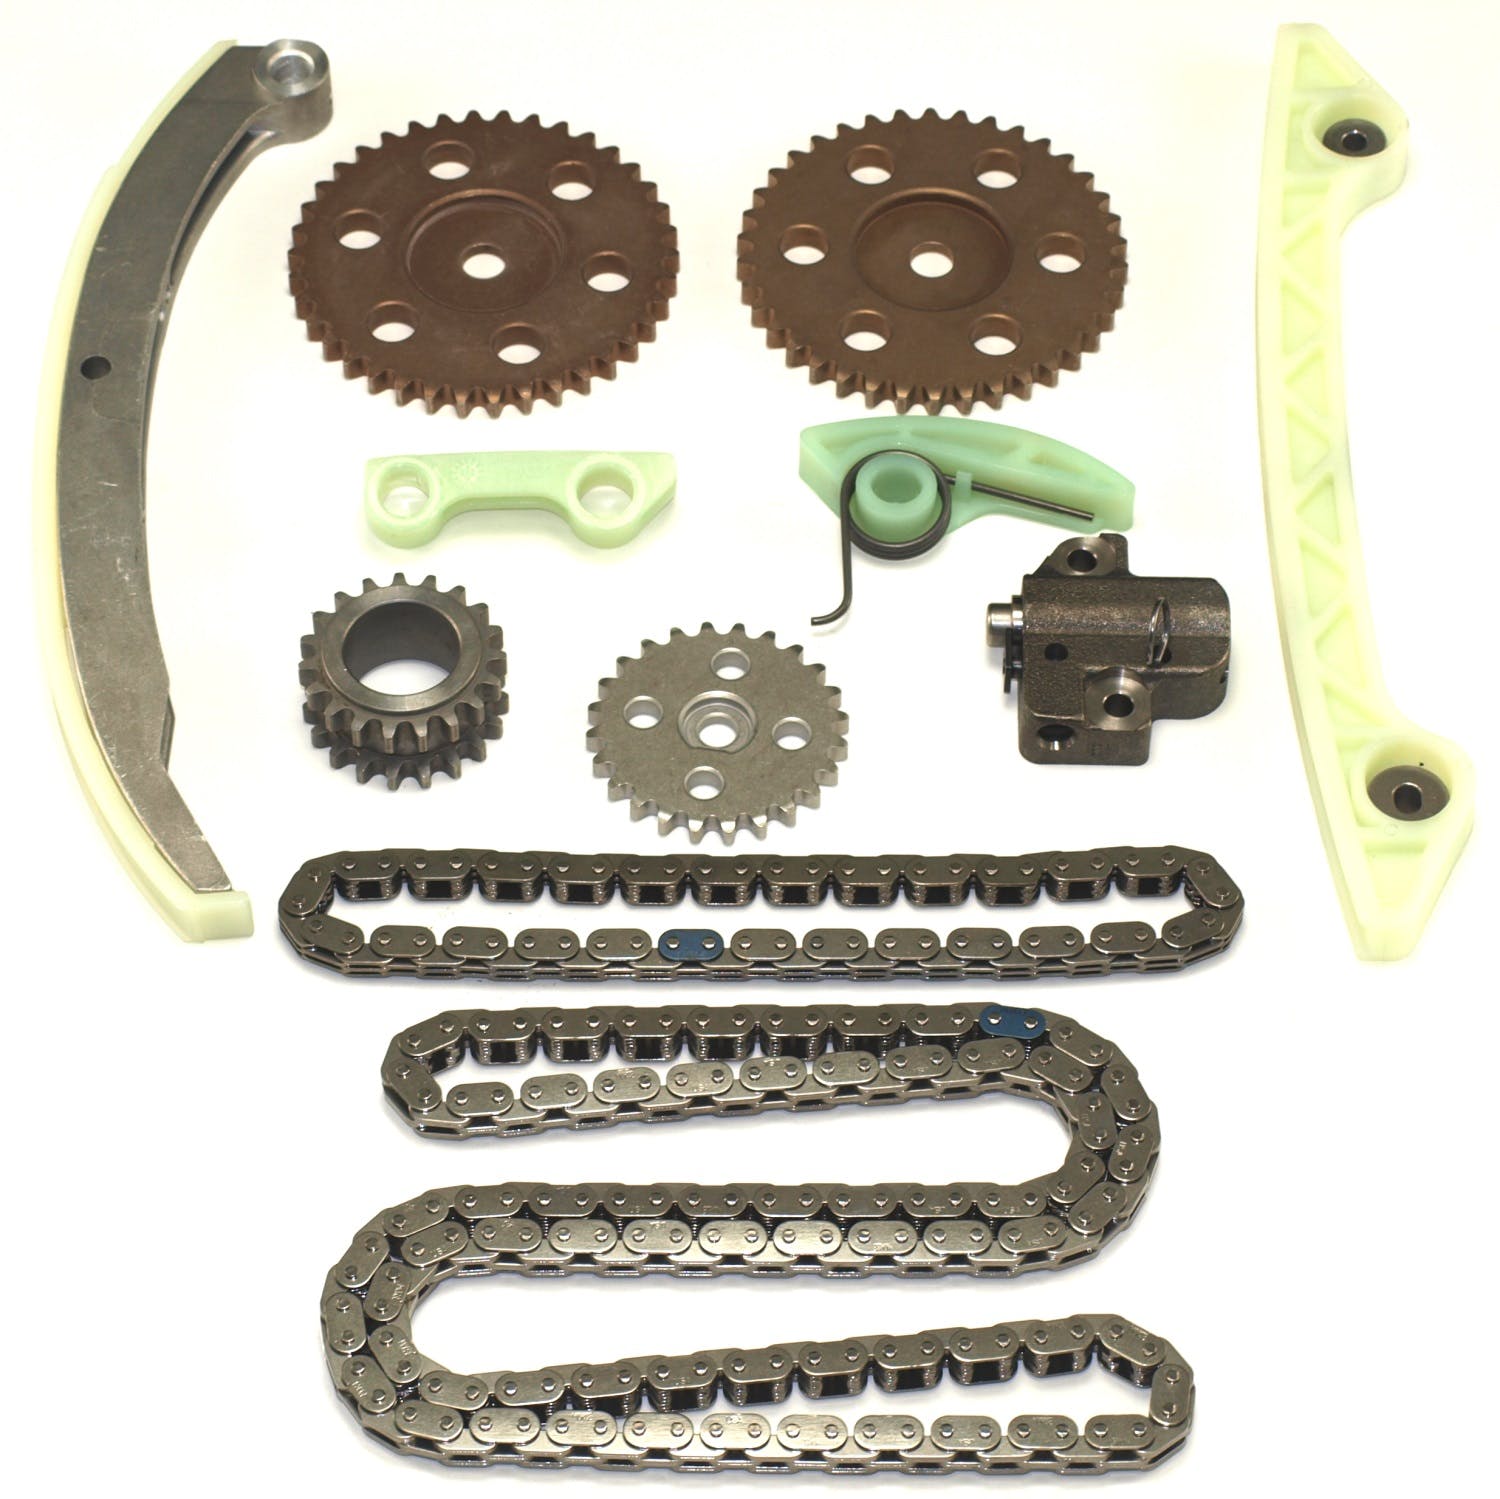 Cloyes 9-0727S Engine Timing Chain Kit Engine Timing Chain Kit